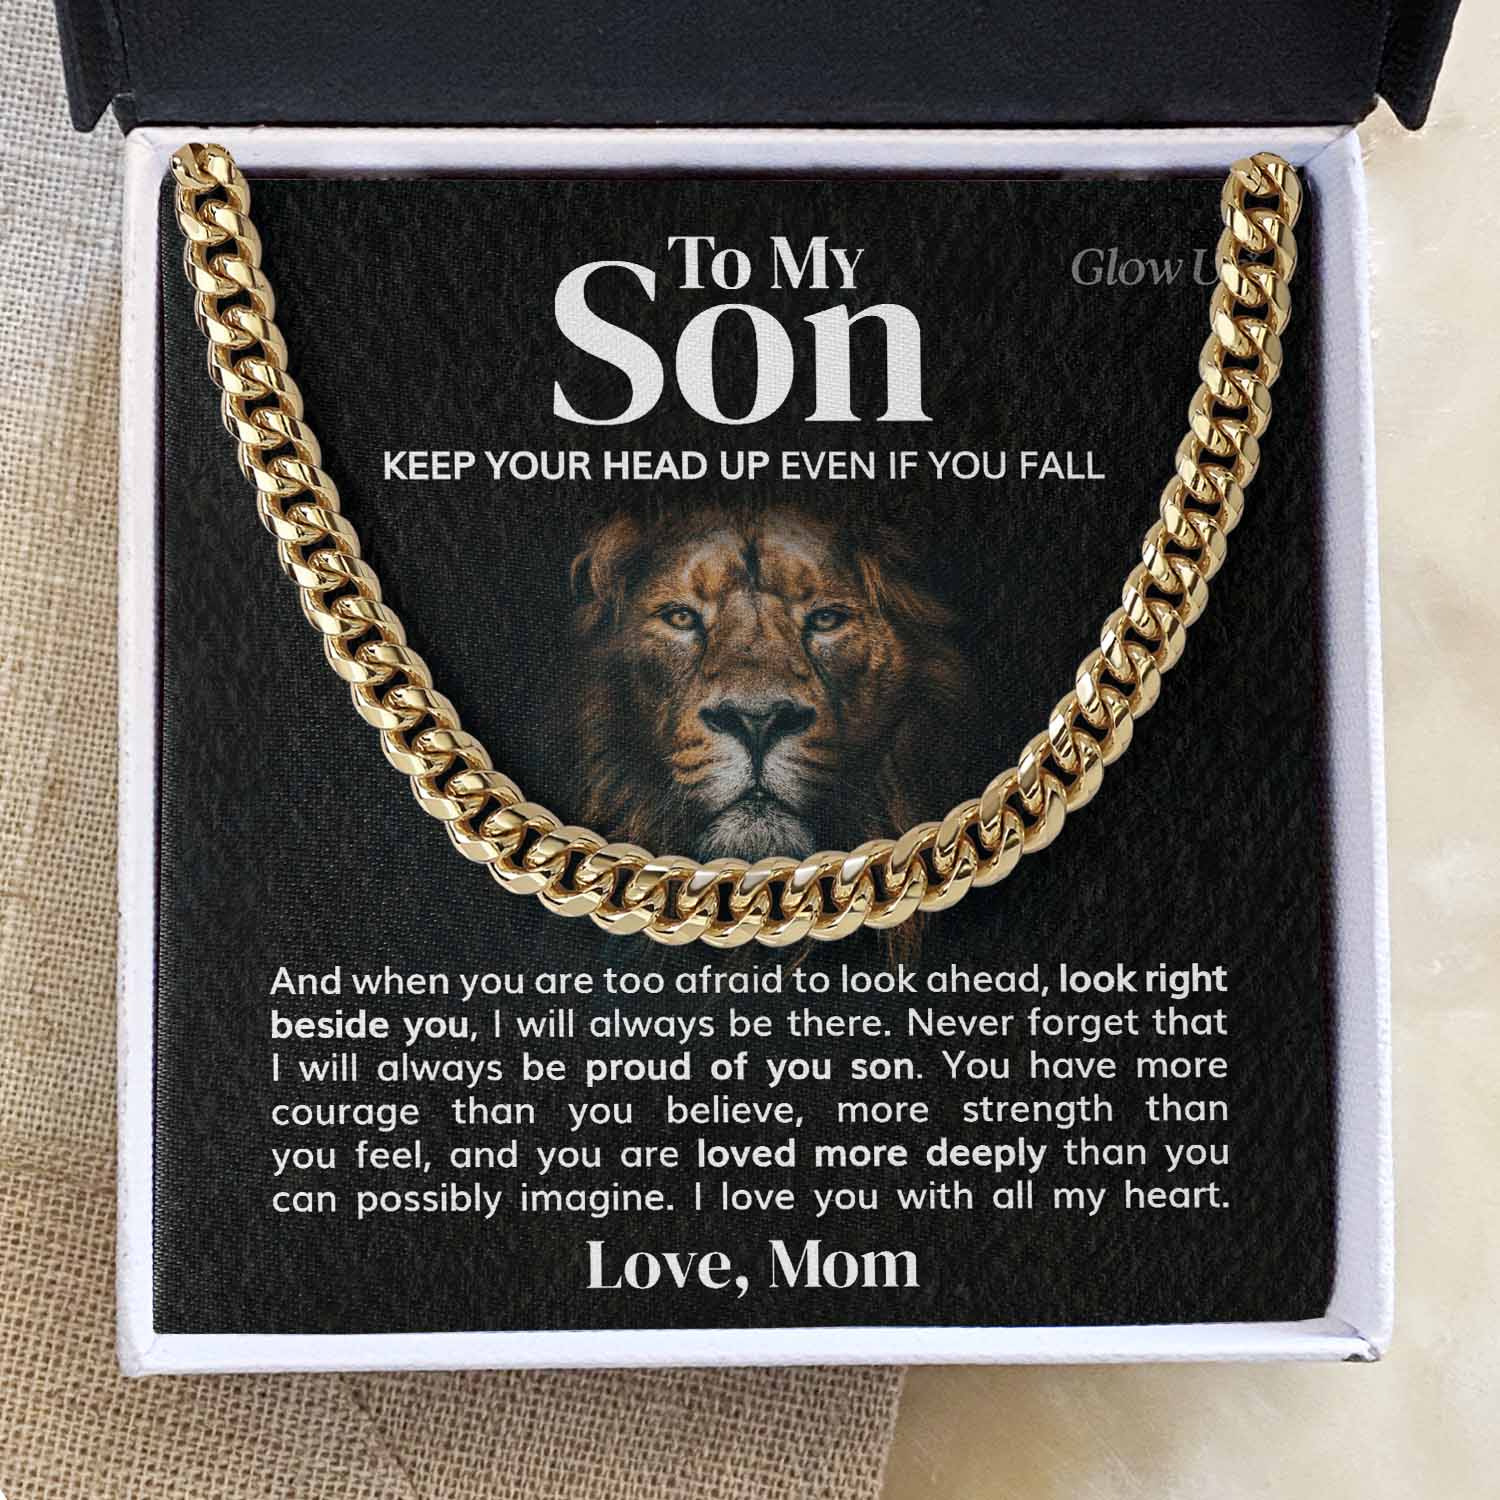 ShineOn Fulfillment Jewelry 14K Yellow Gold Finish / Two-Toned Box To my Son - Keep your head up - Cuban Link Chain